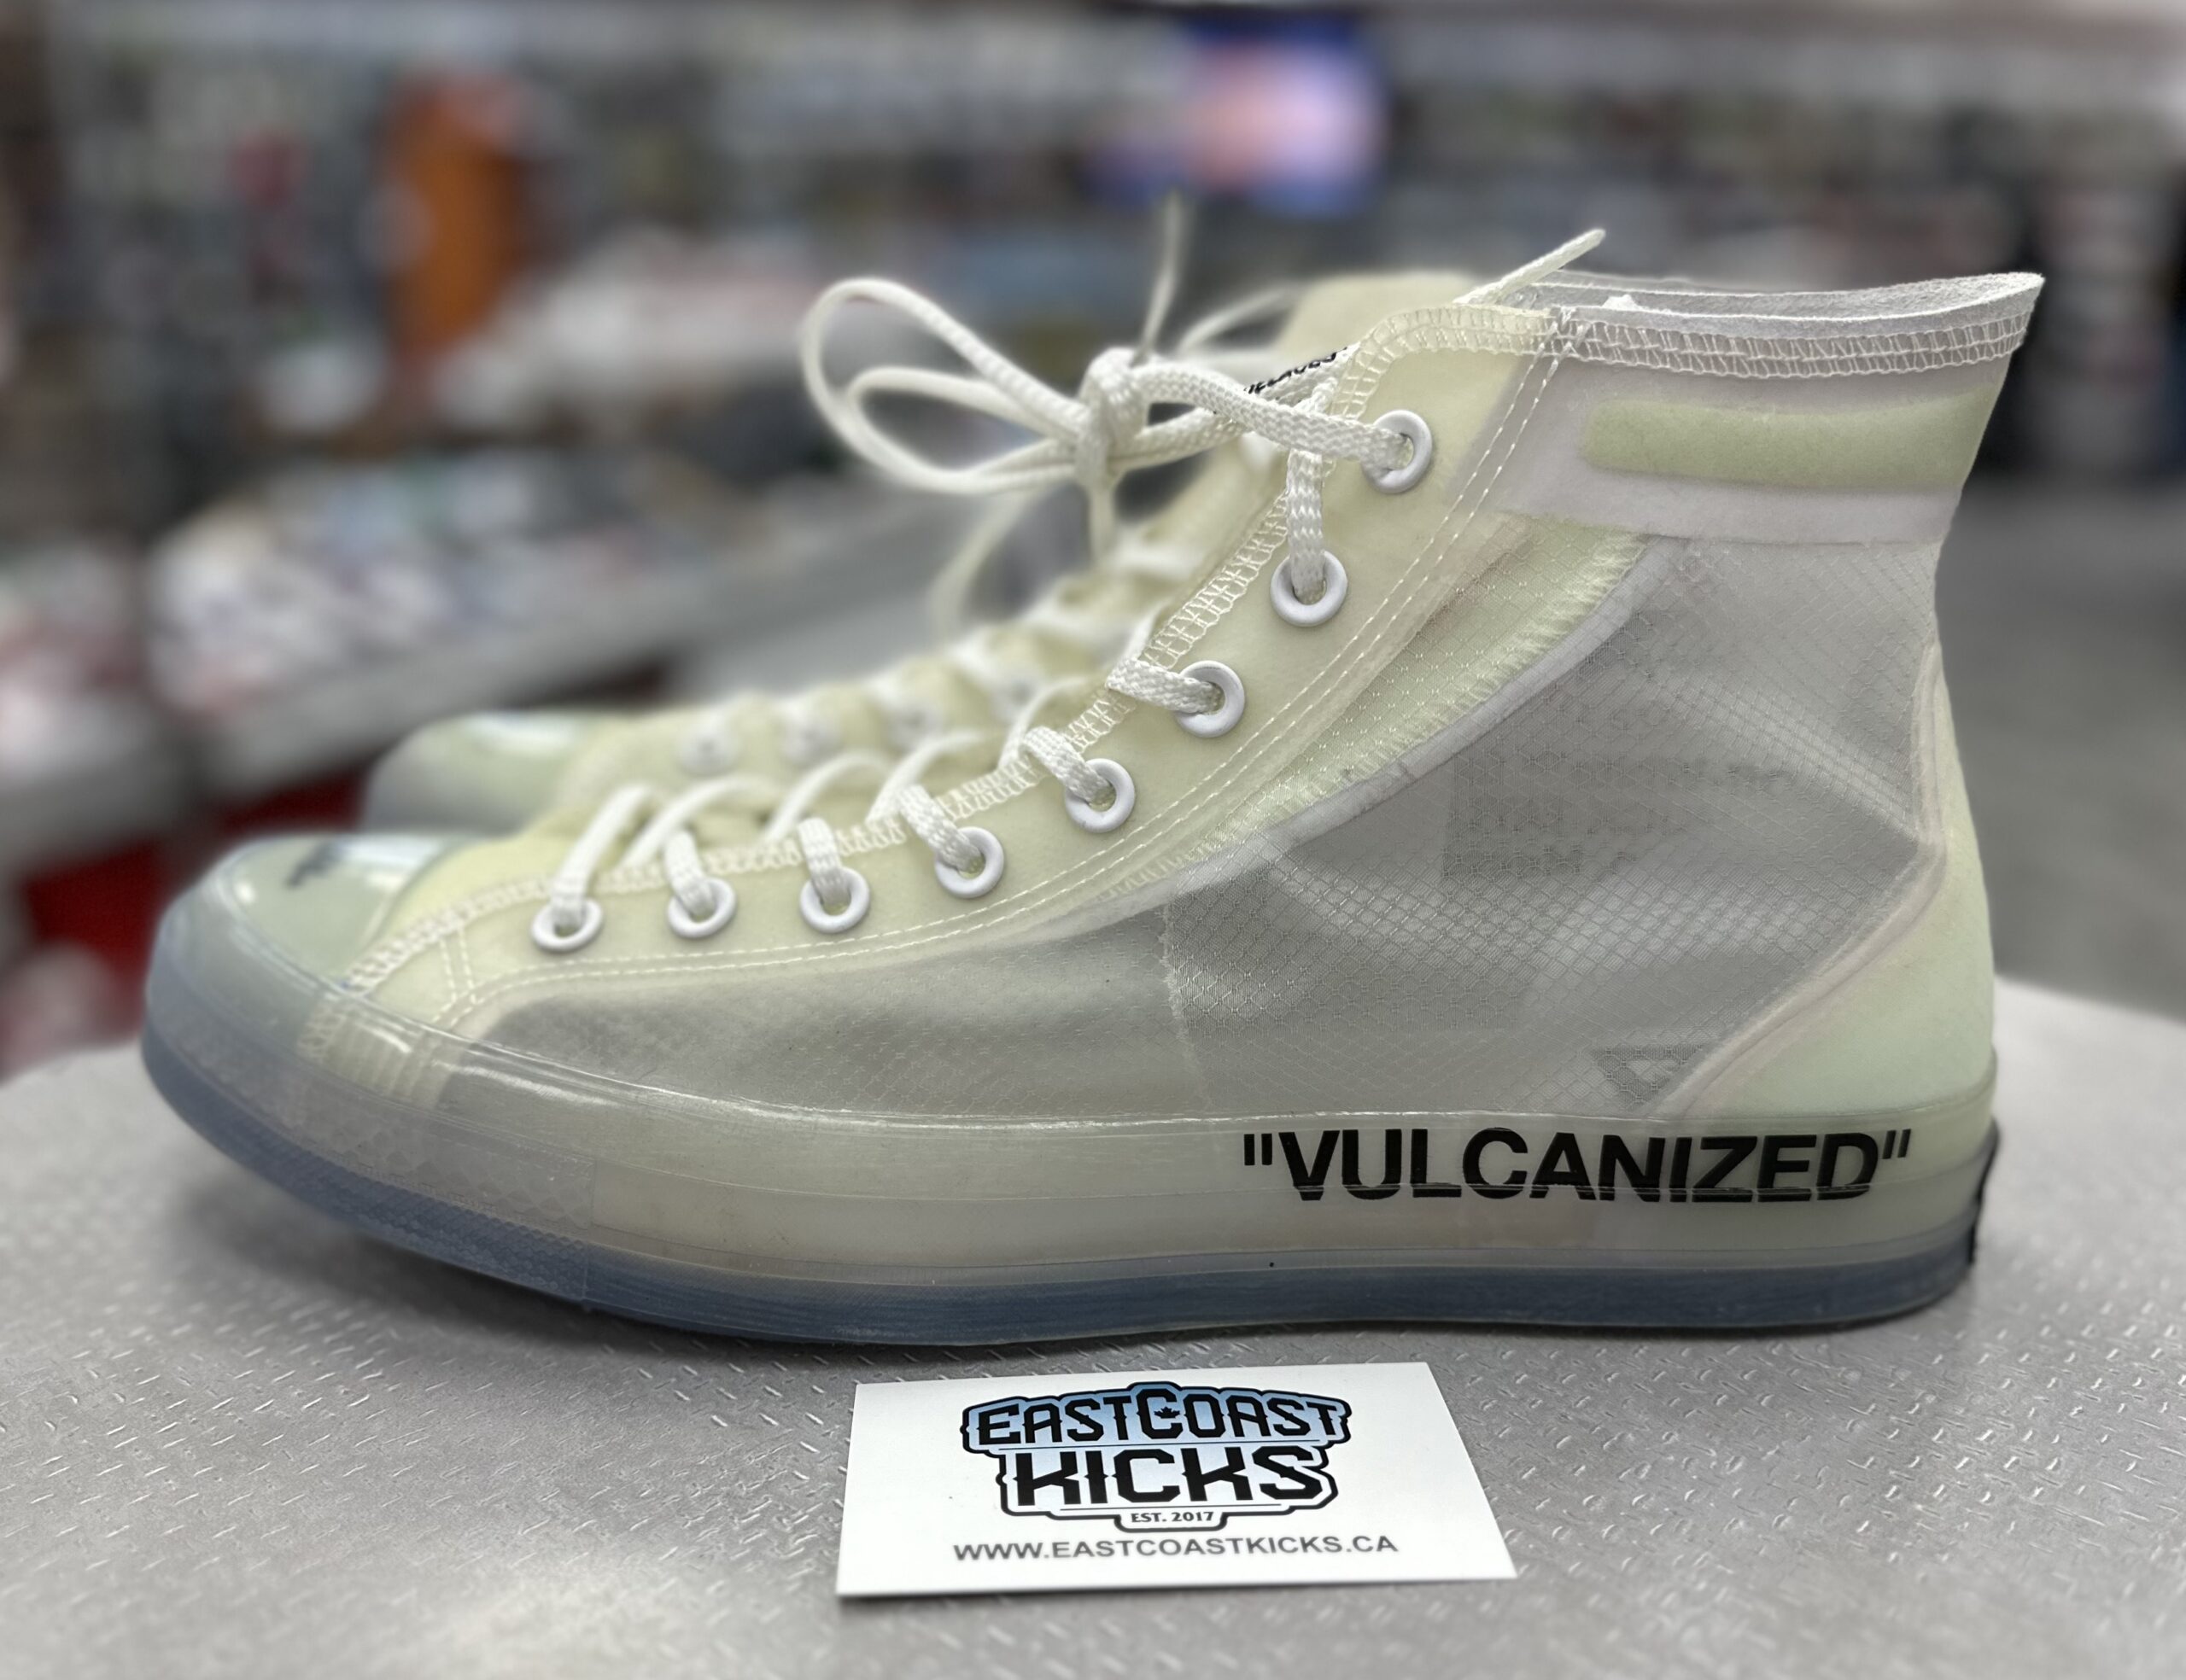 Preowned Converse Chuck Taylor All Star Vulcanized Hi Off-White Size 12